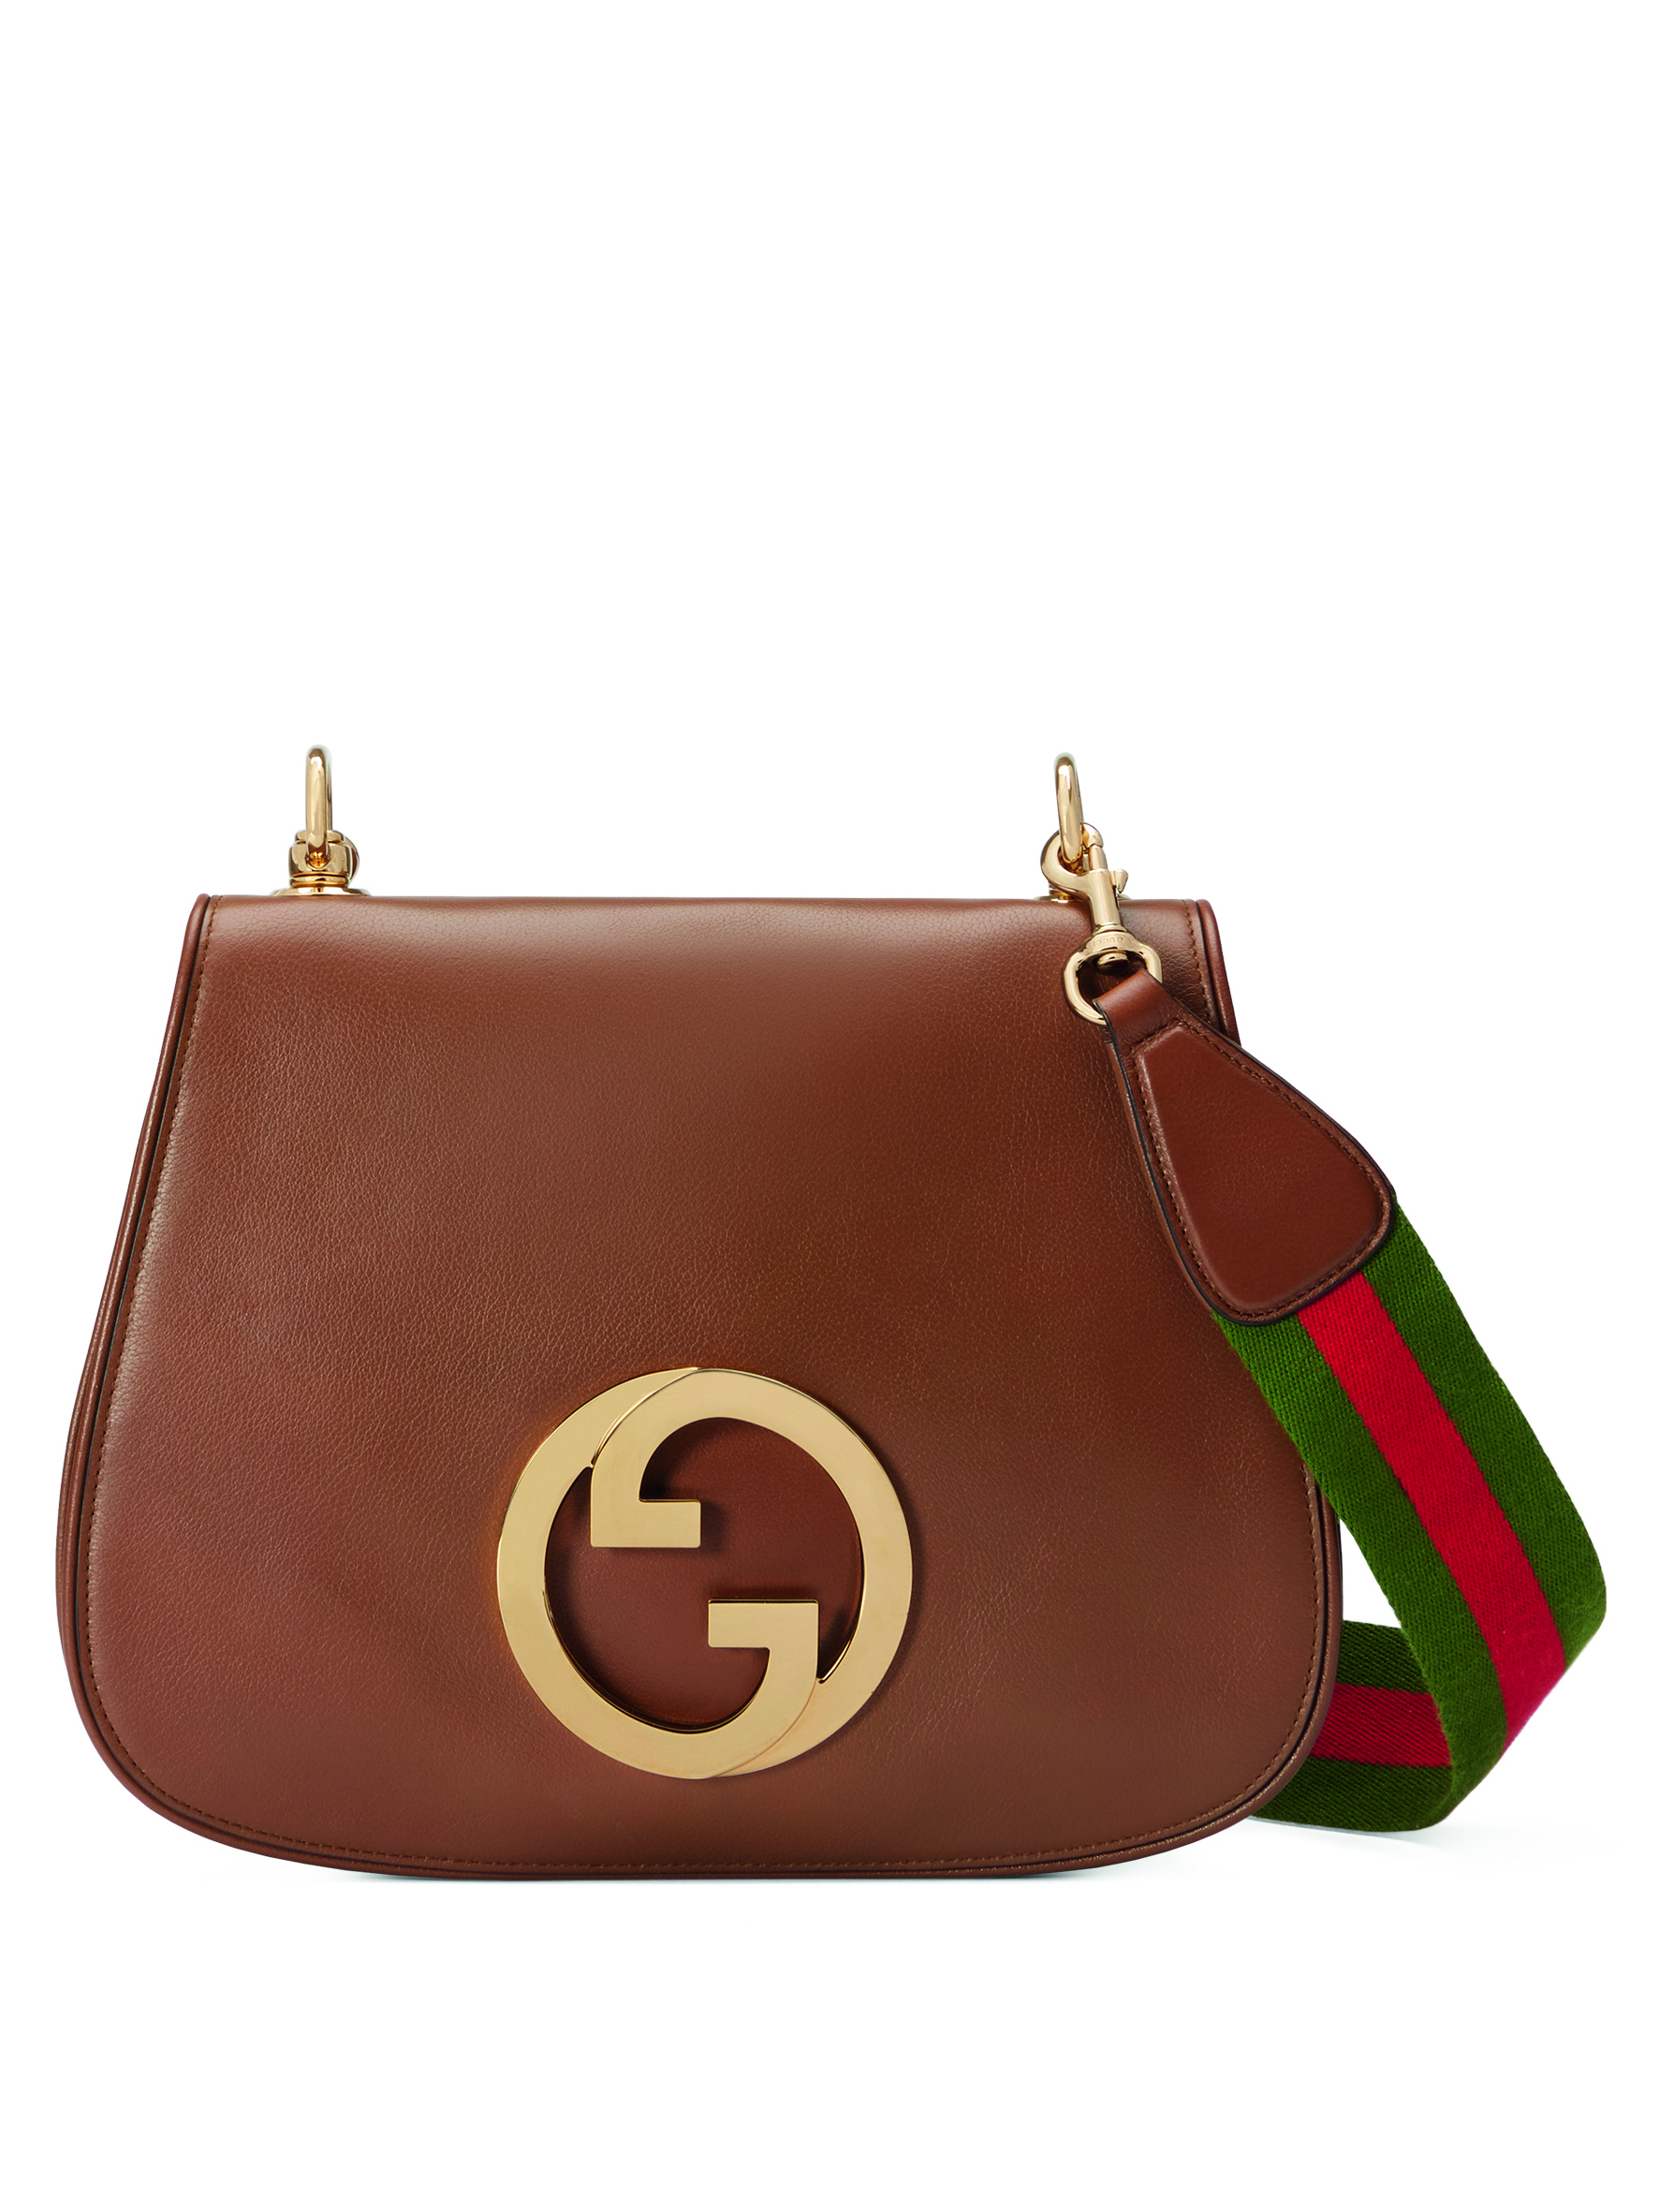 Discover GUCCI Blondie Spring Summer 2022 Handbag Collection